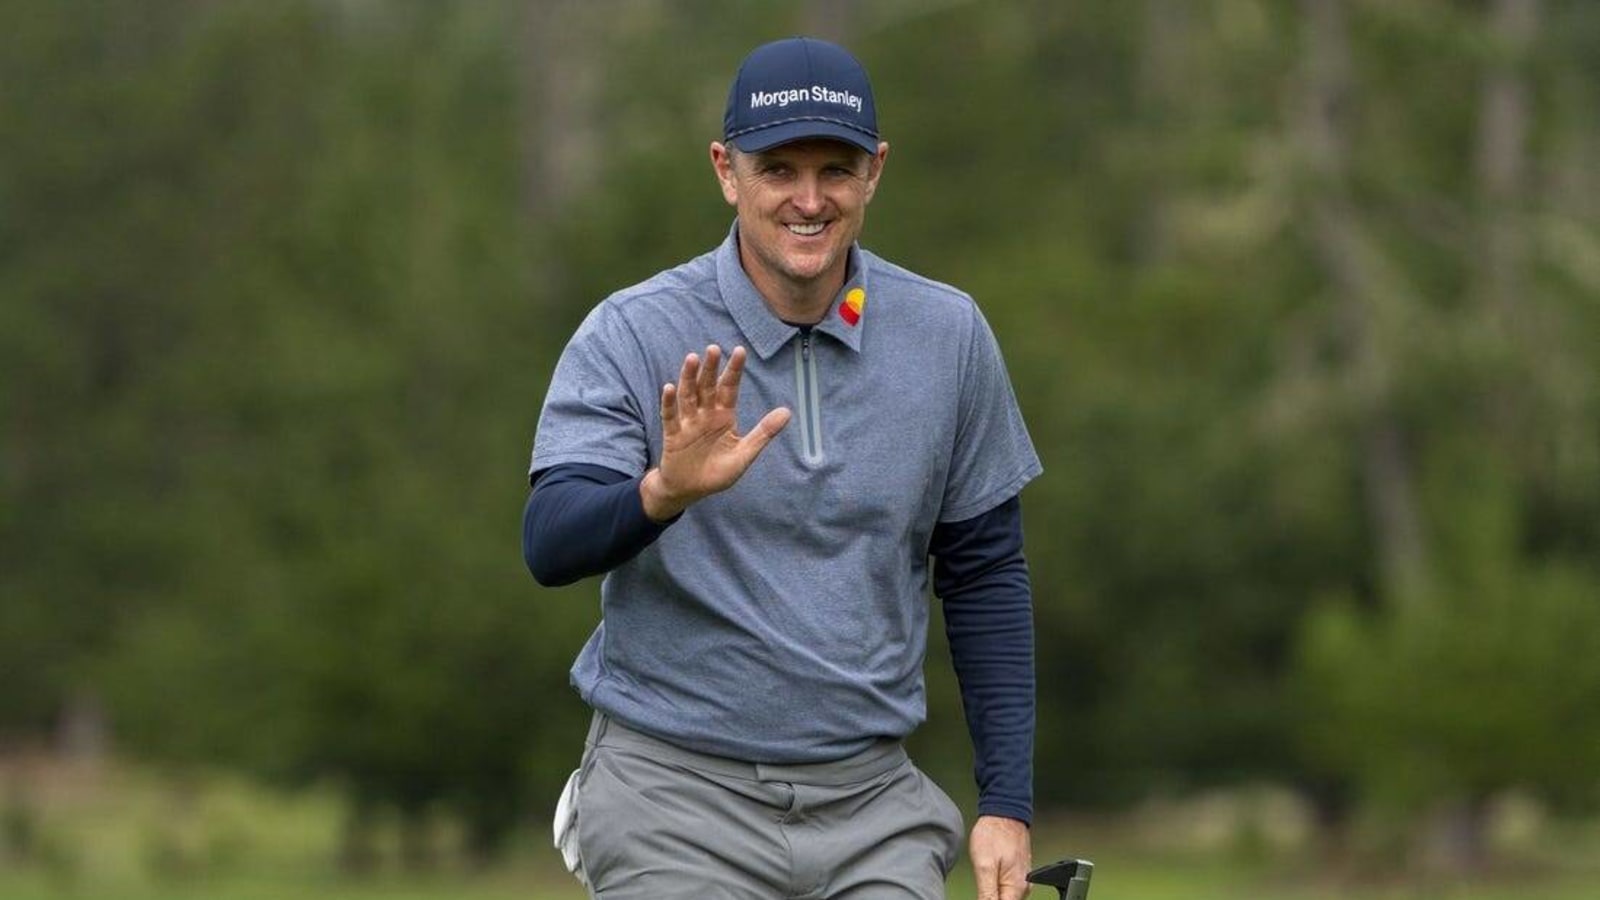 Justin Rose outlasts weather issues, takes Pebble Beach Pro-Am lead